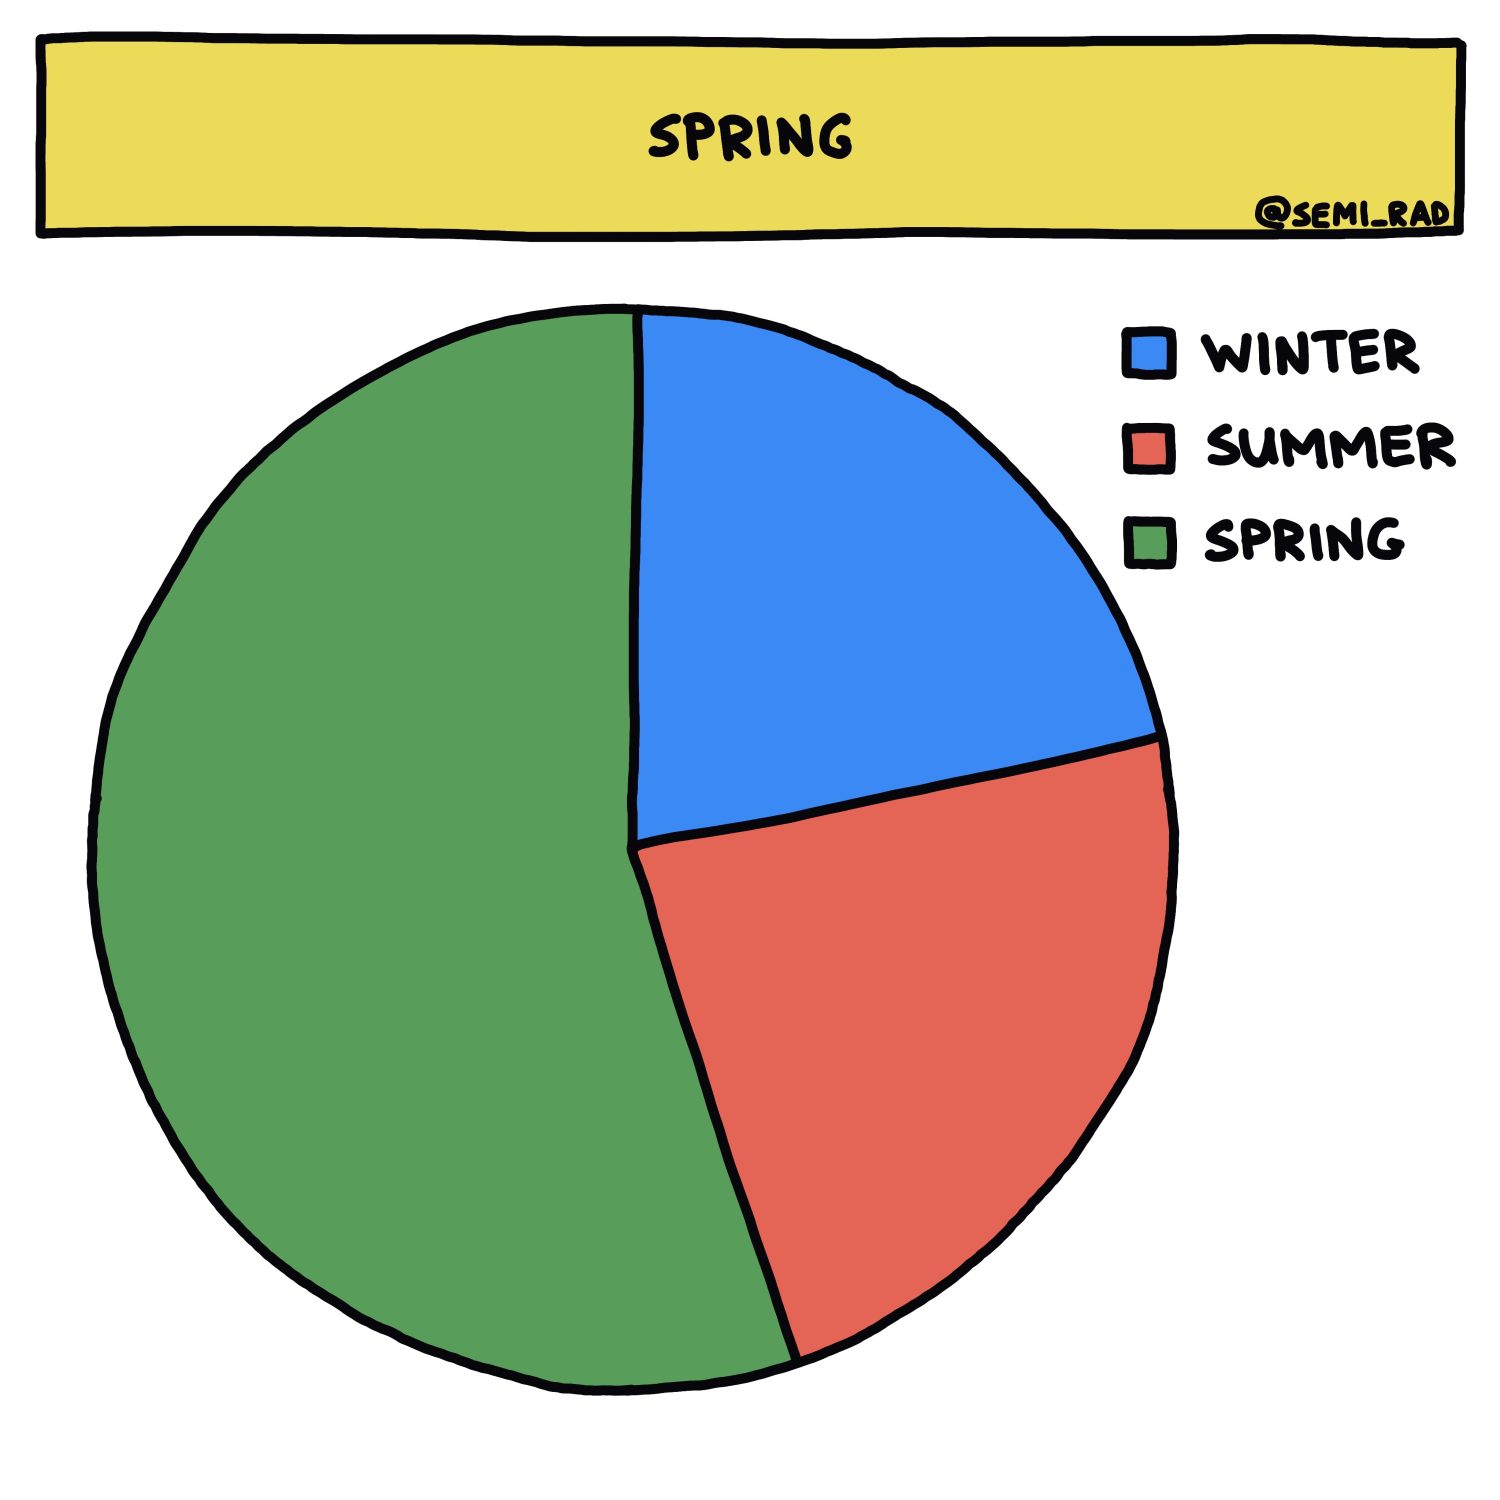 Spring: A Pie Chart